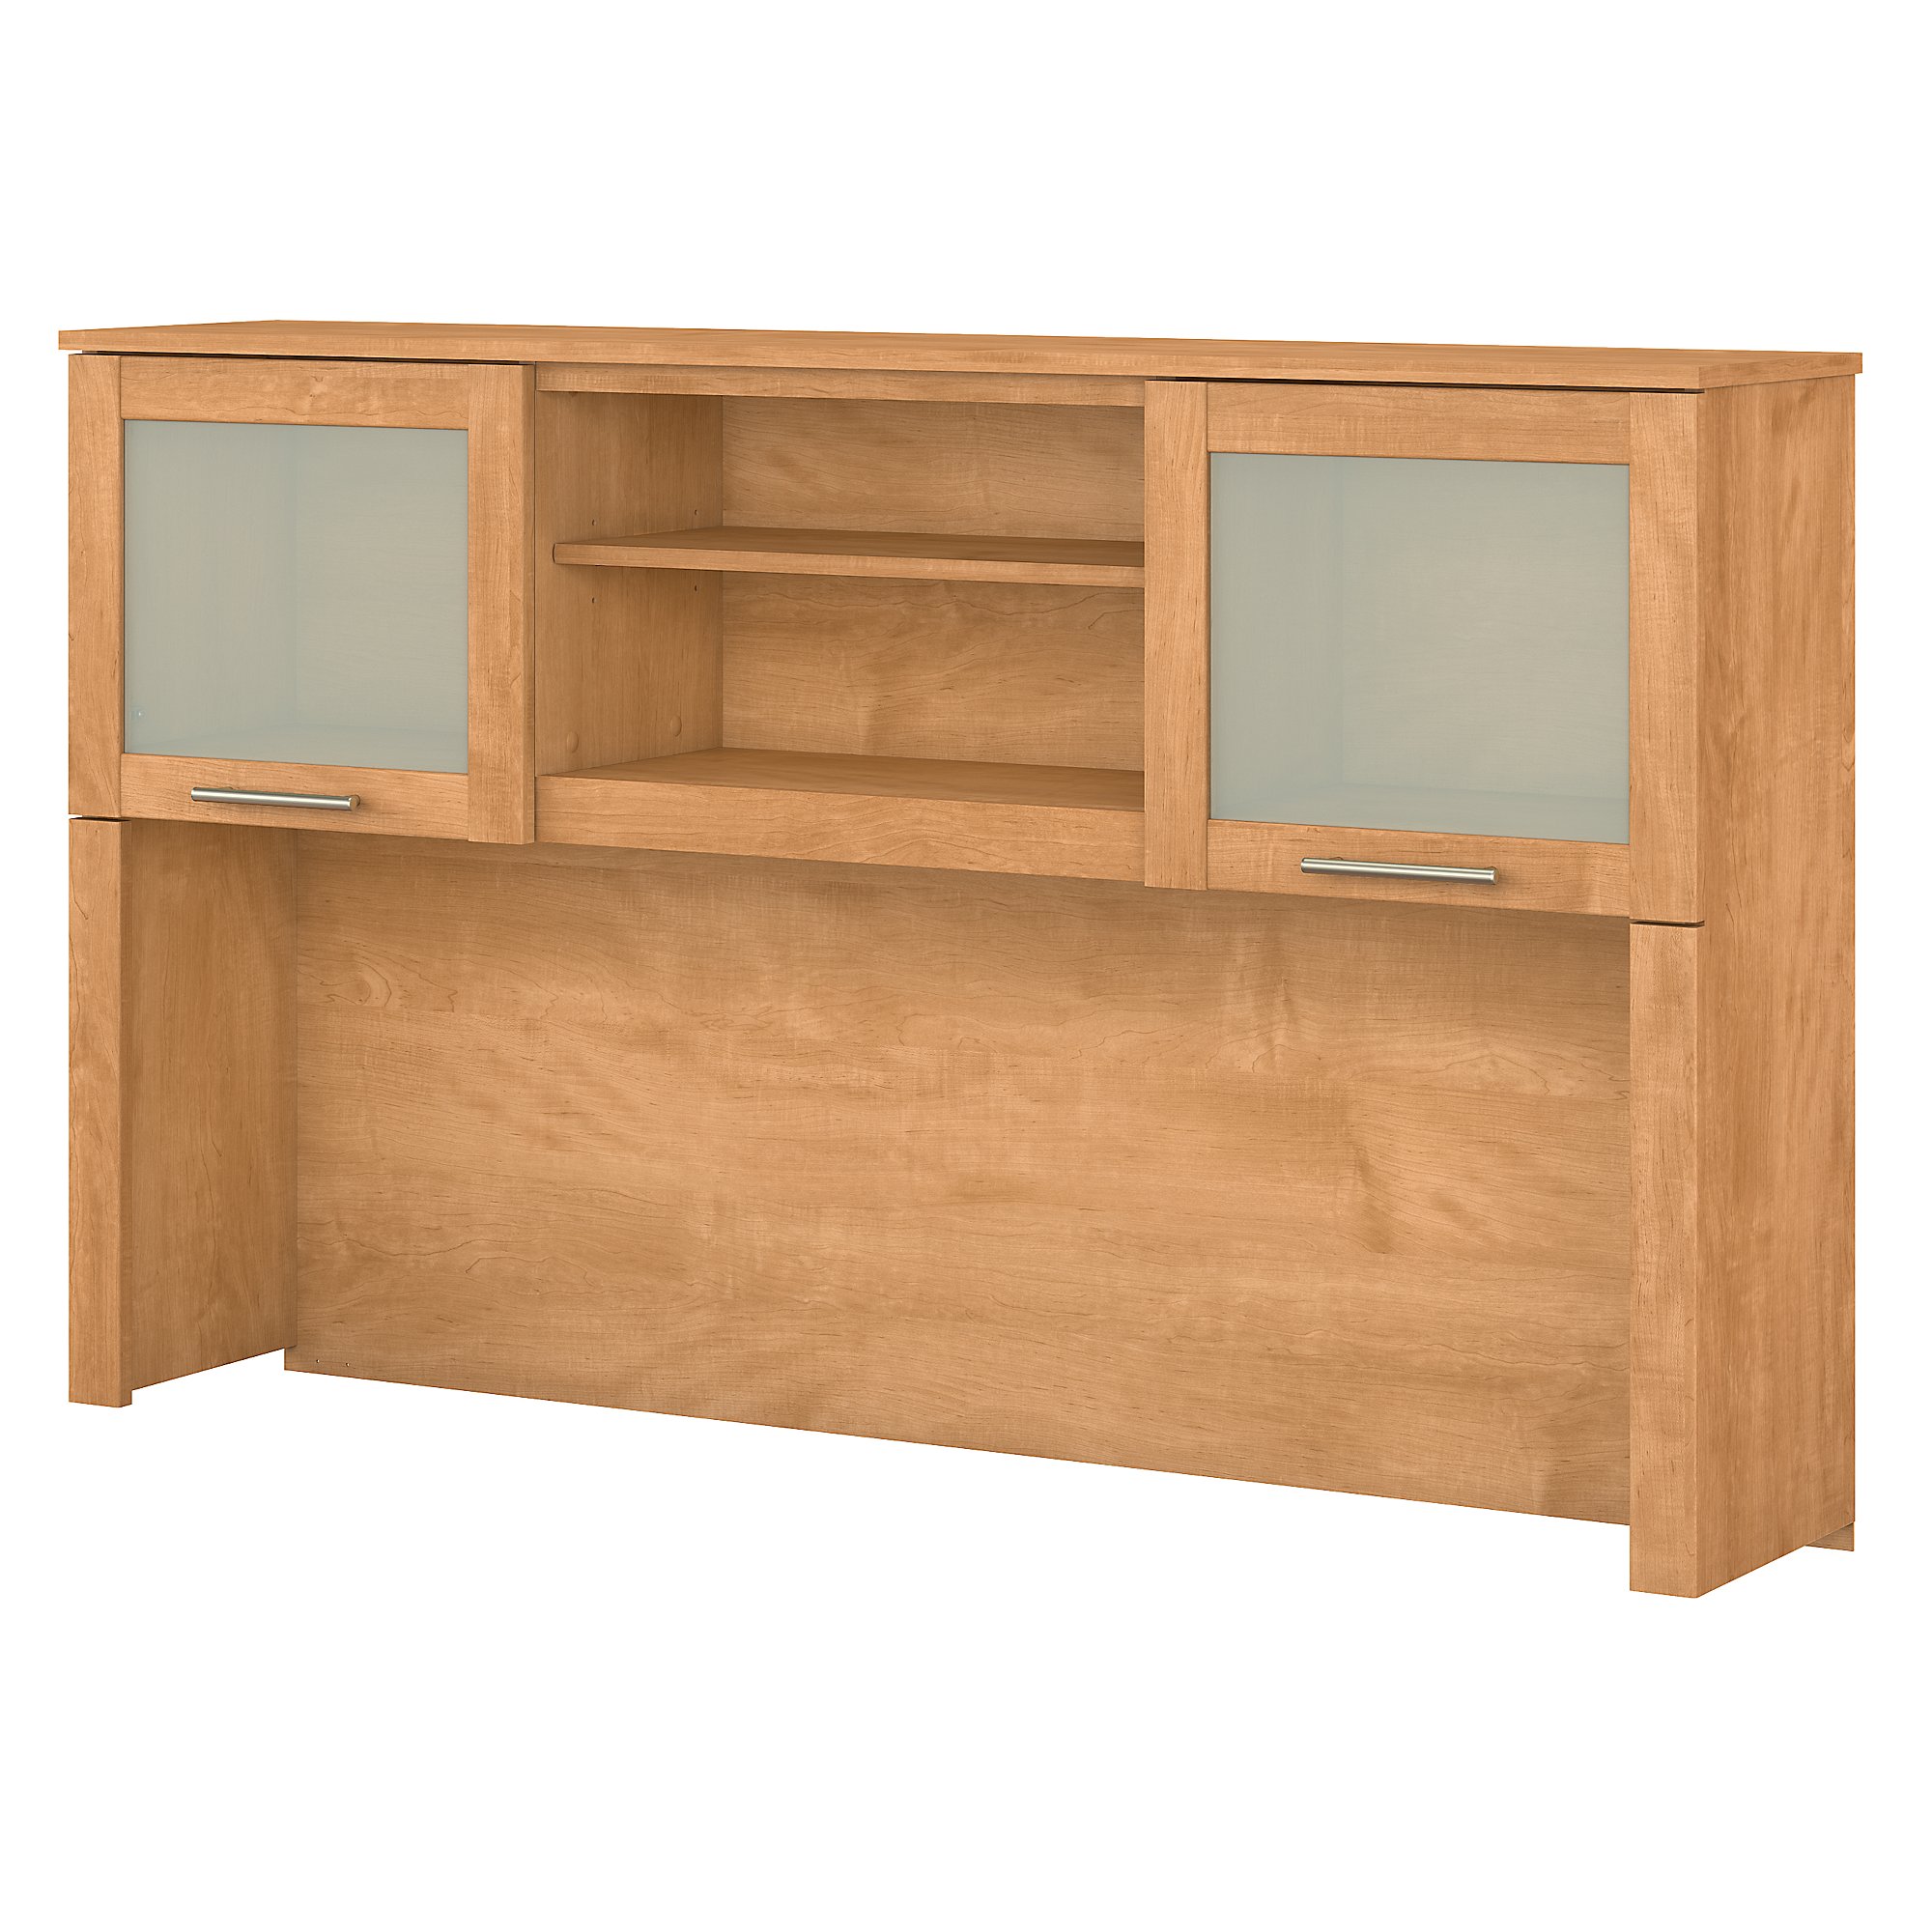 Bush Furniture Somerset 60 in 2-Door Hutch with Open Storage in Maple Cross - fits on Somerset 60 in L Desk (Sold Separately) - image 1 of 3